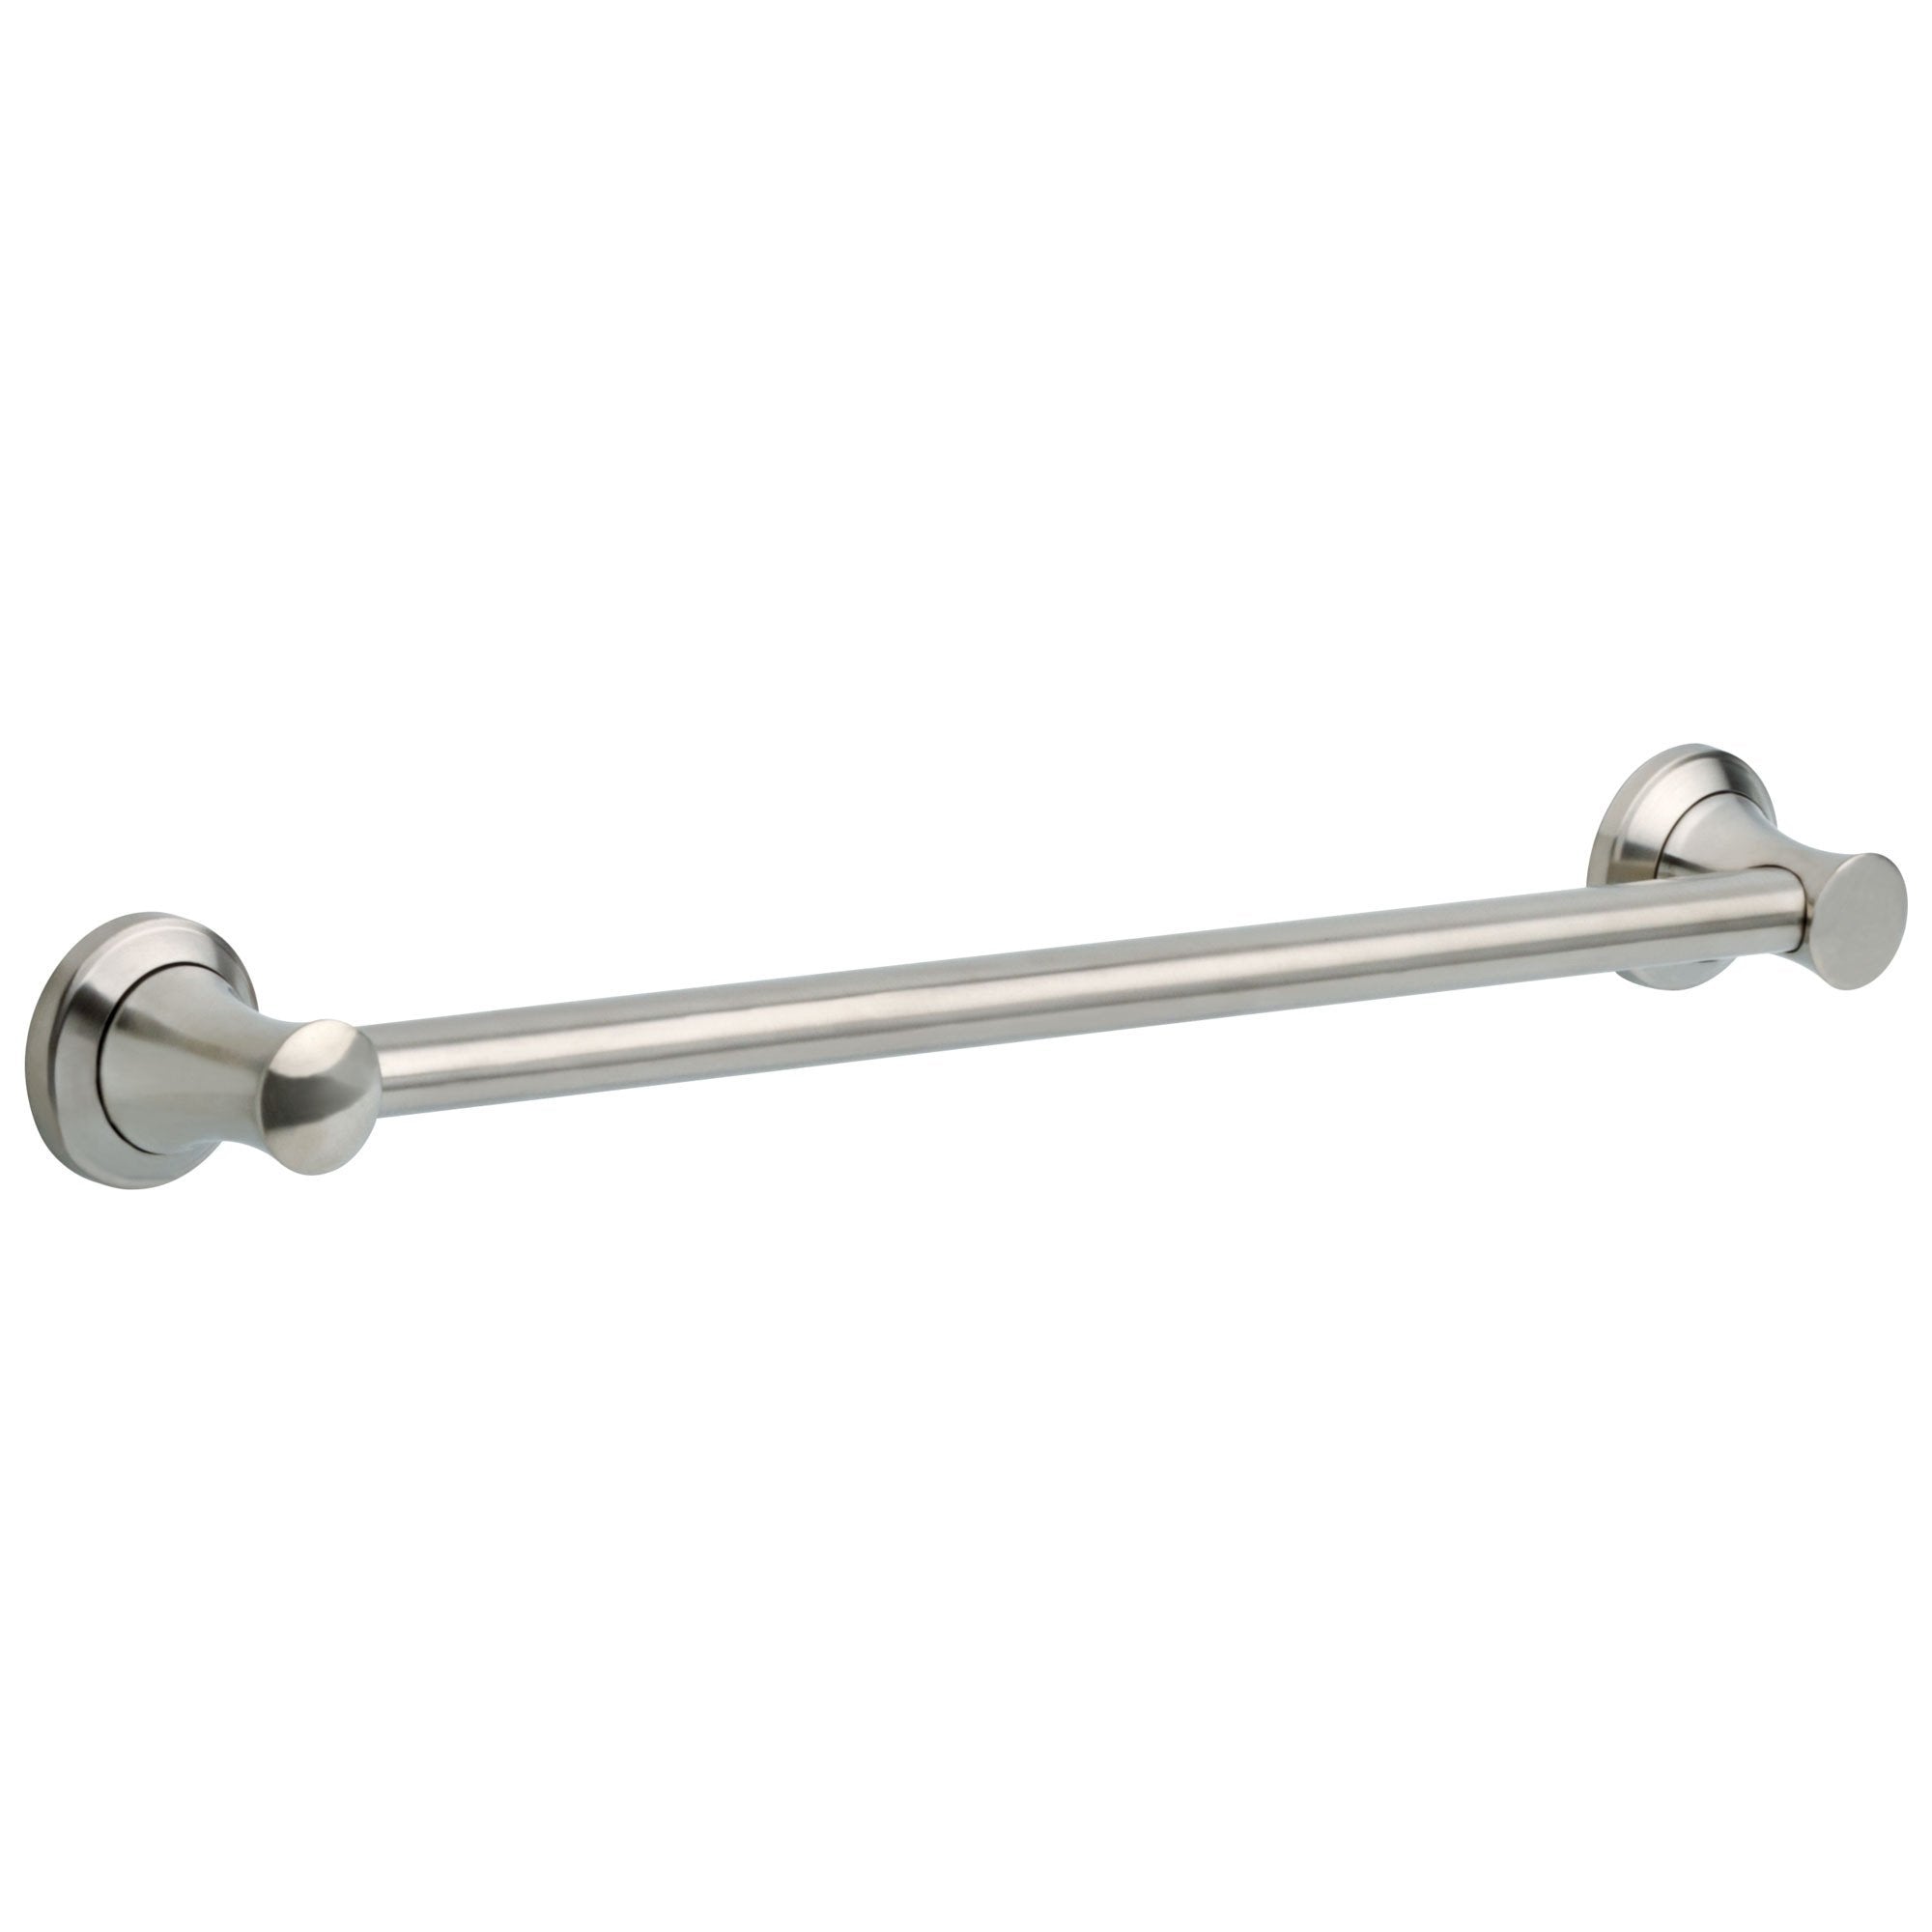 Delta Bath Safety Collection Stainless Steel Finish Transitional Style Decorative ADA Approved 24" Grab Bar for Bathroom or Shower D41724SS